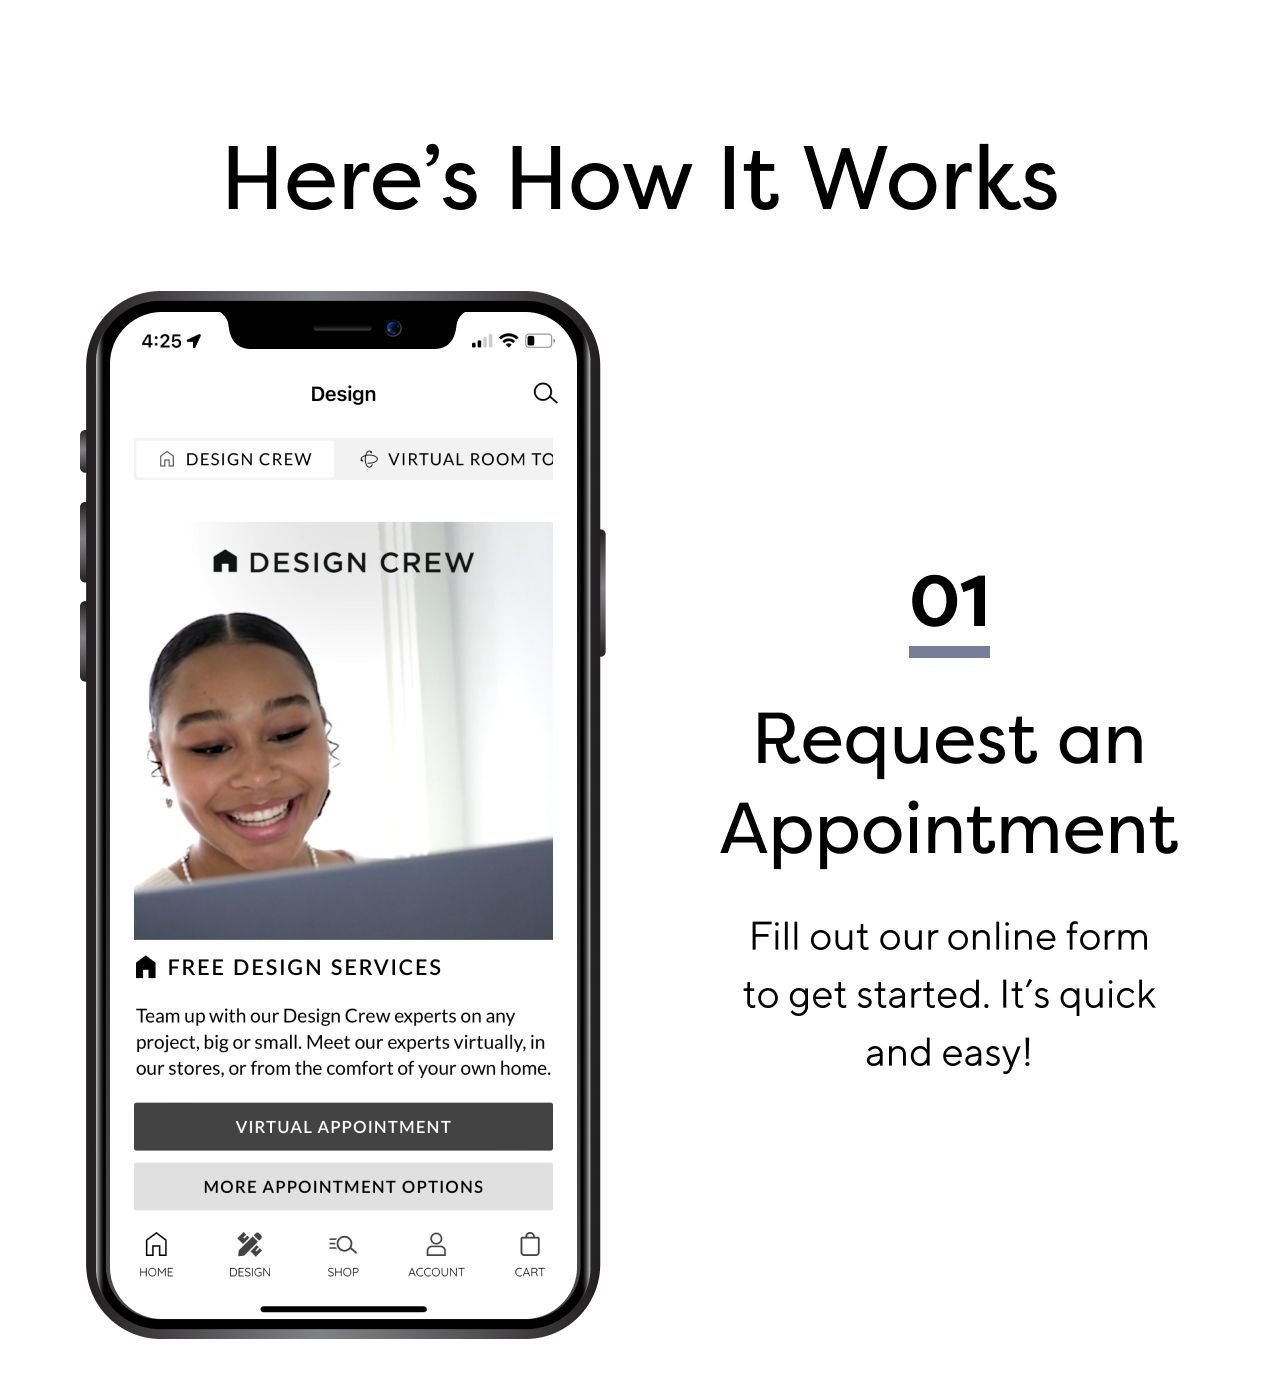 HERE'S HOW IT WORKS. REQUEST AN APPOINTMENT